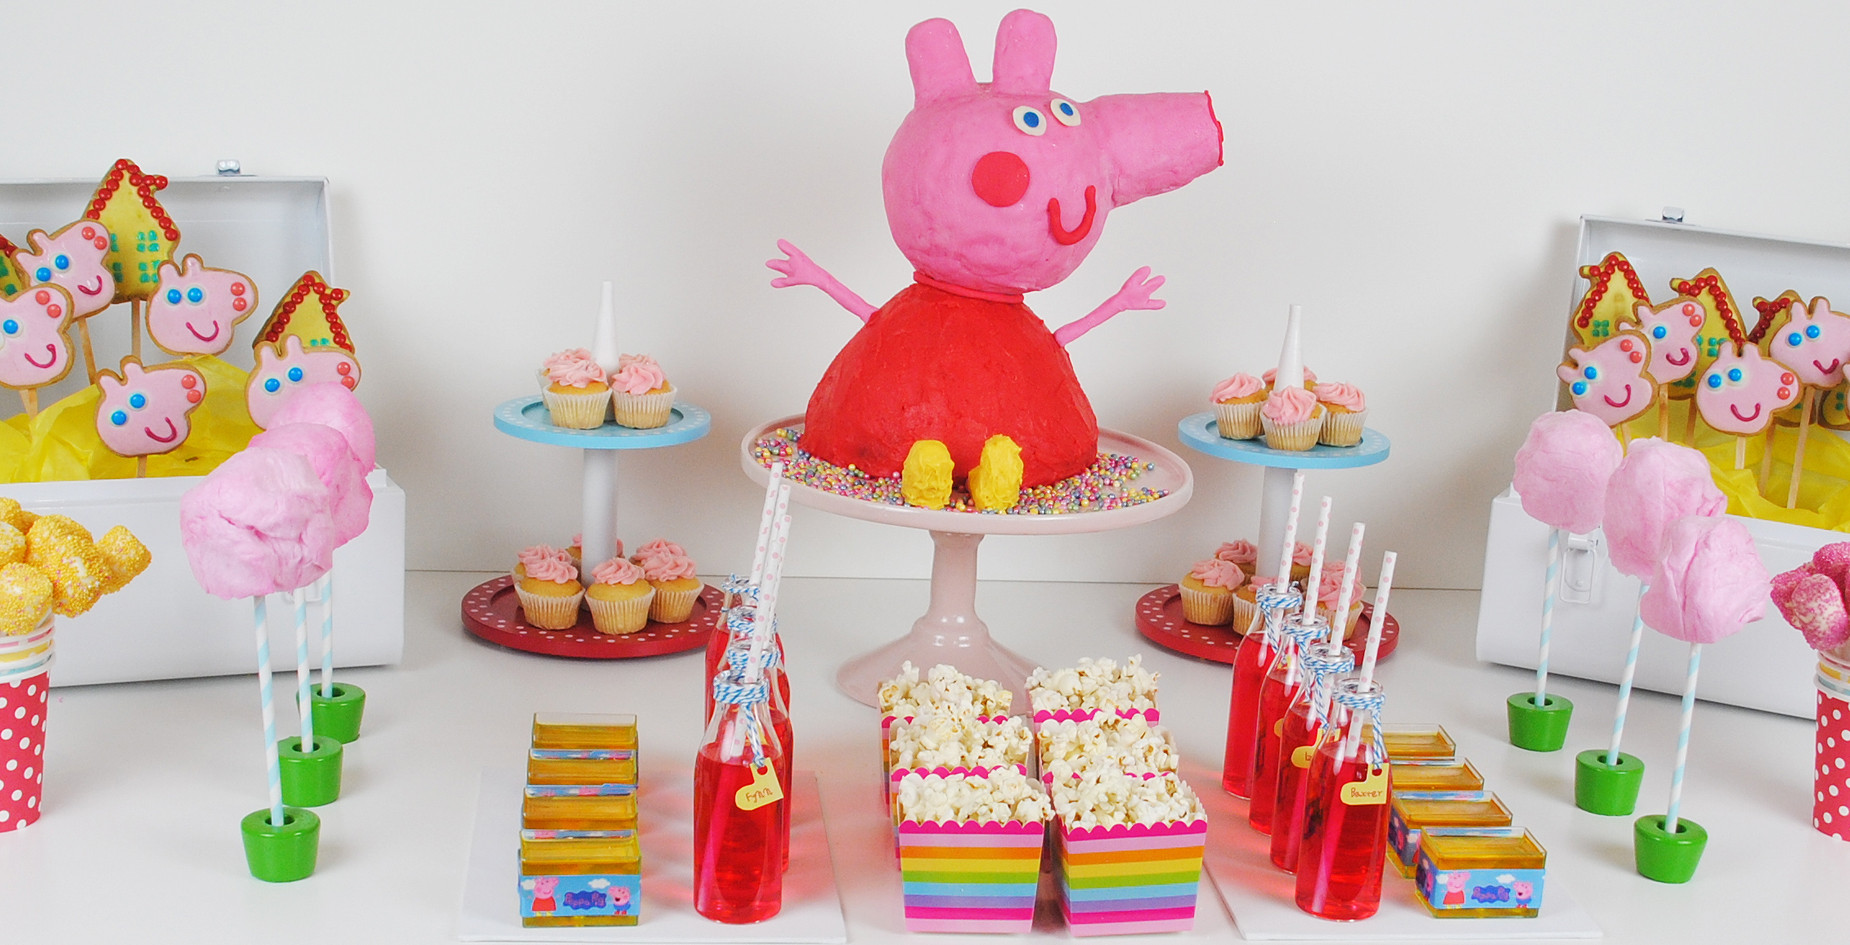 Peppa Pig Birthday Party Decorations
 Sandy Party Decorations